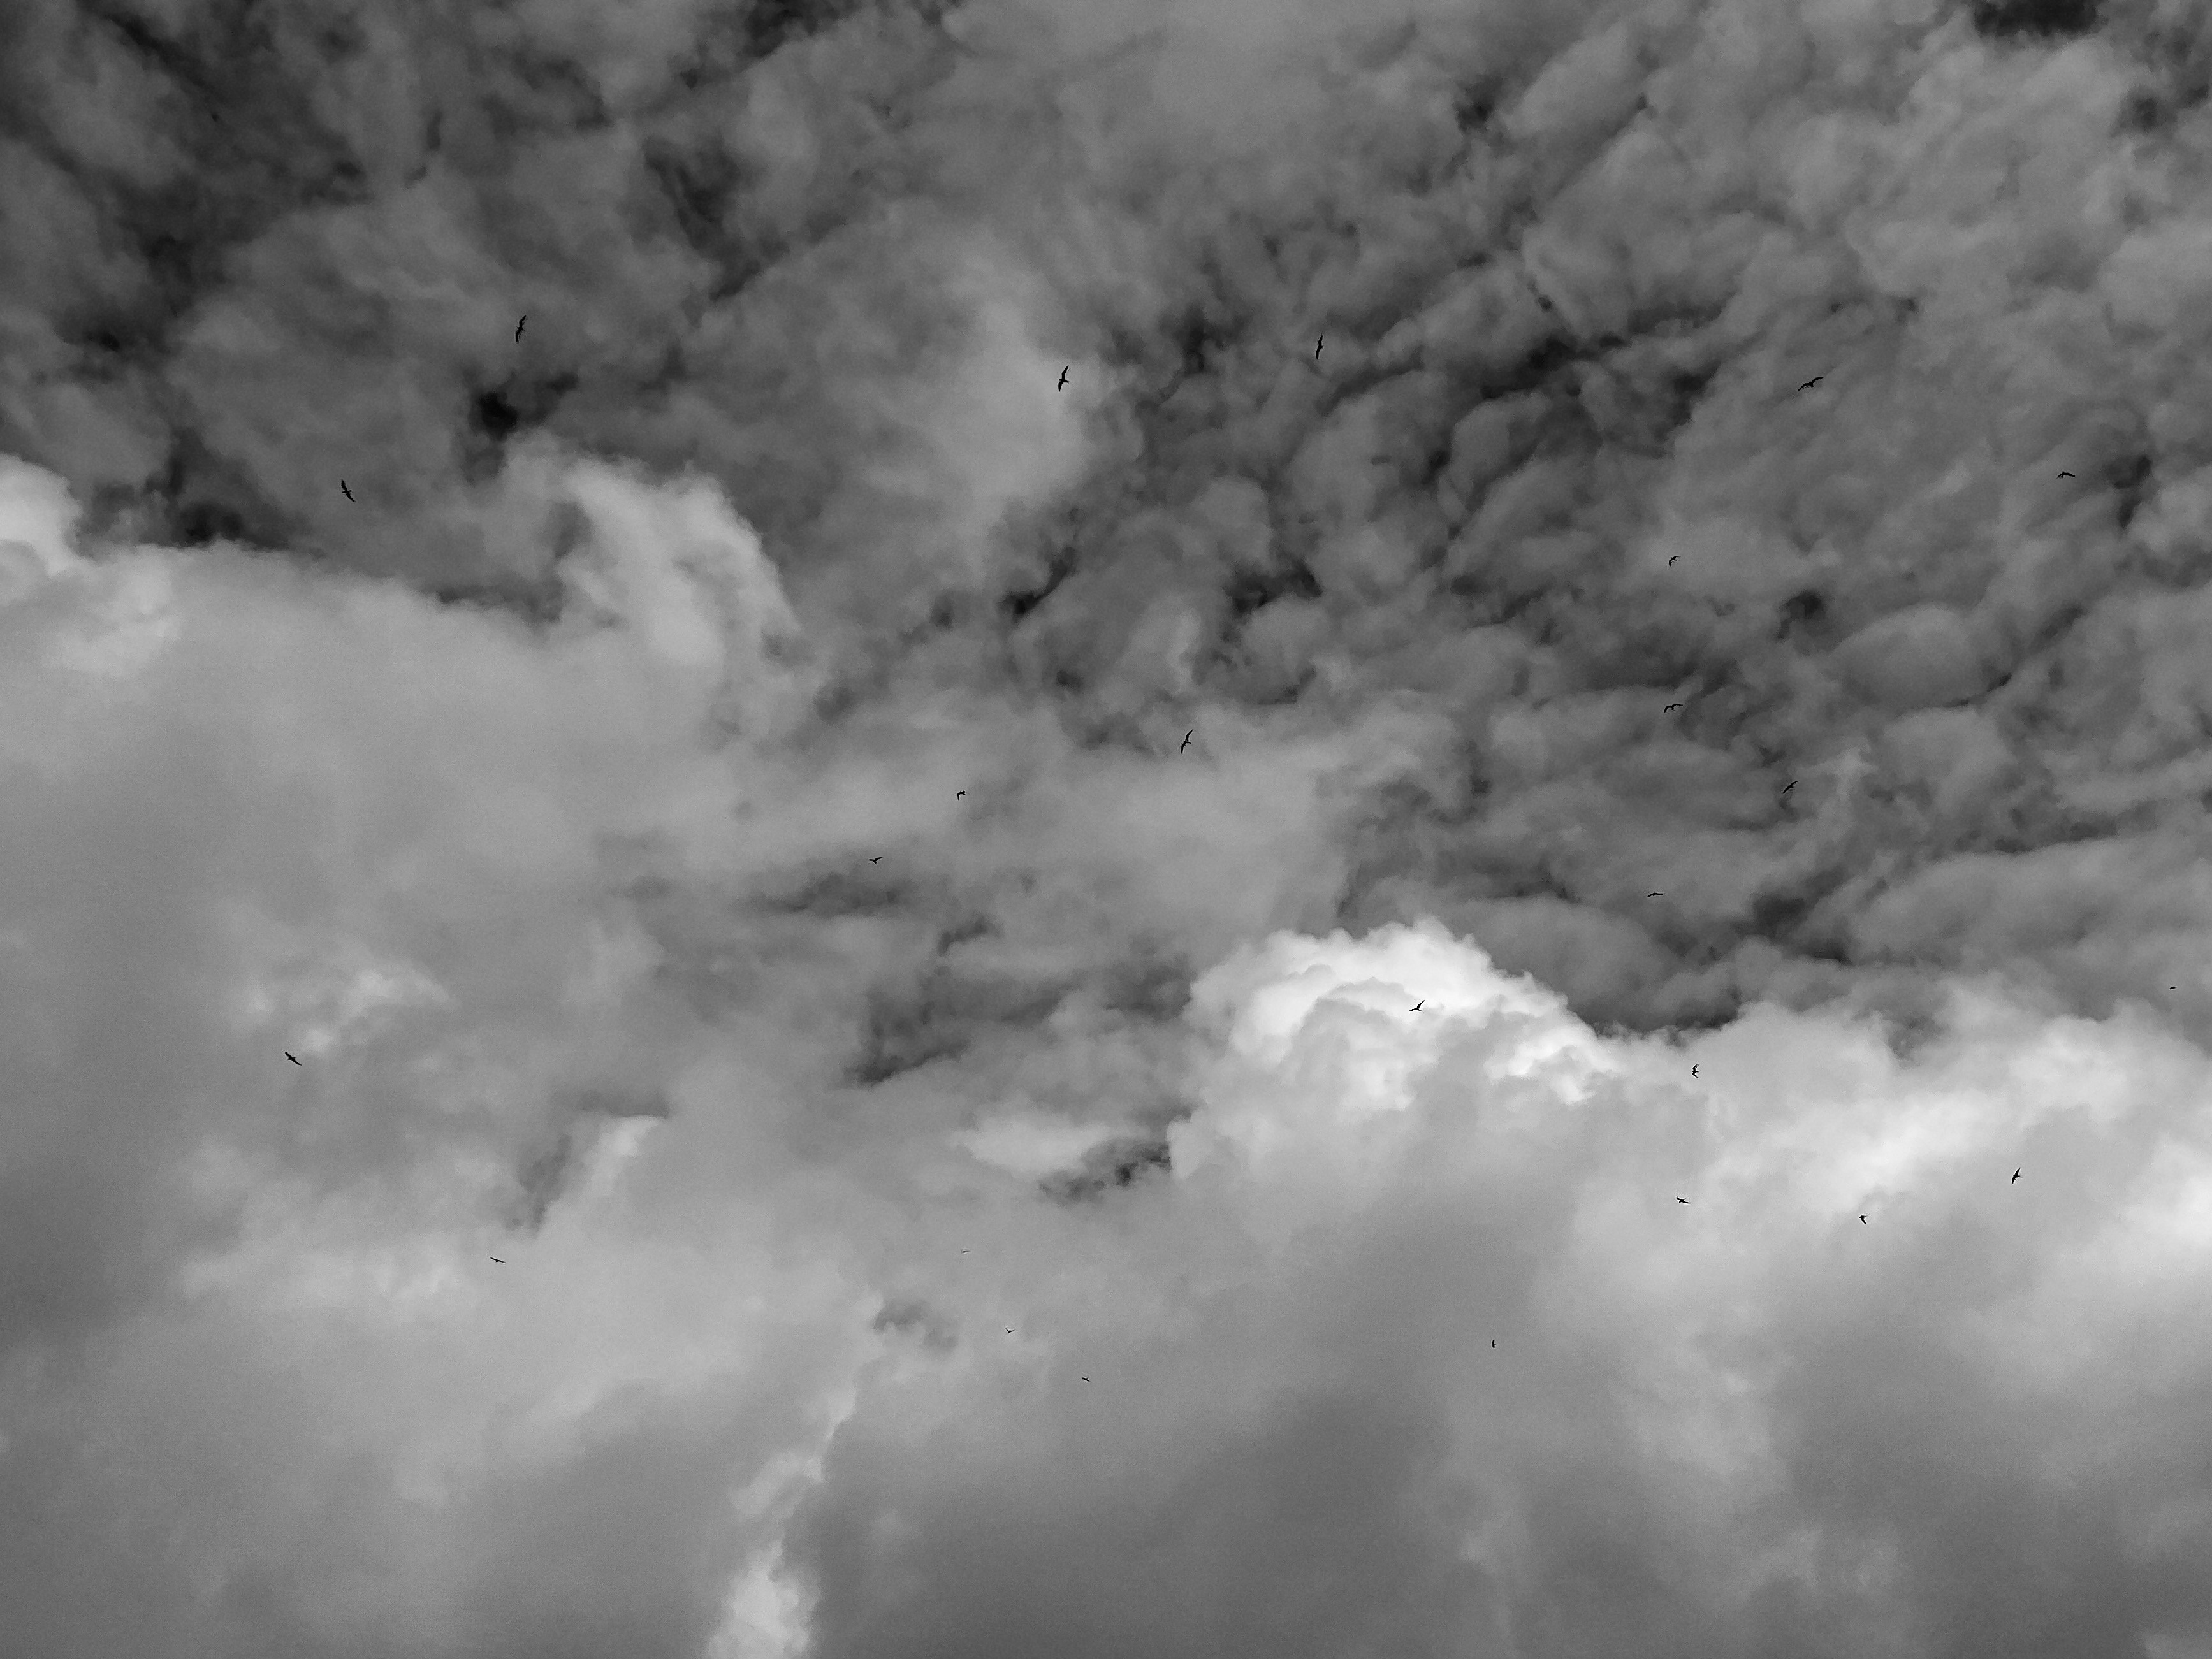 Birds in the clouds in black and white